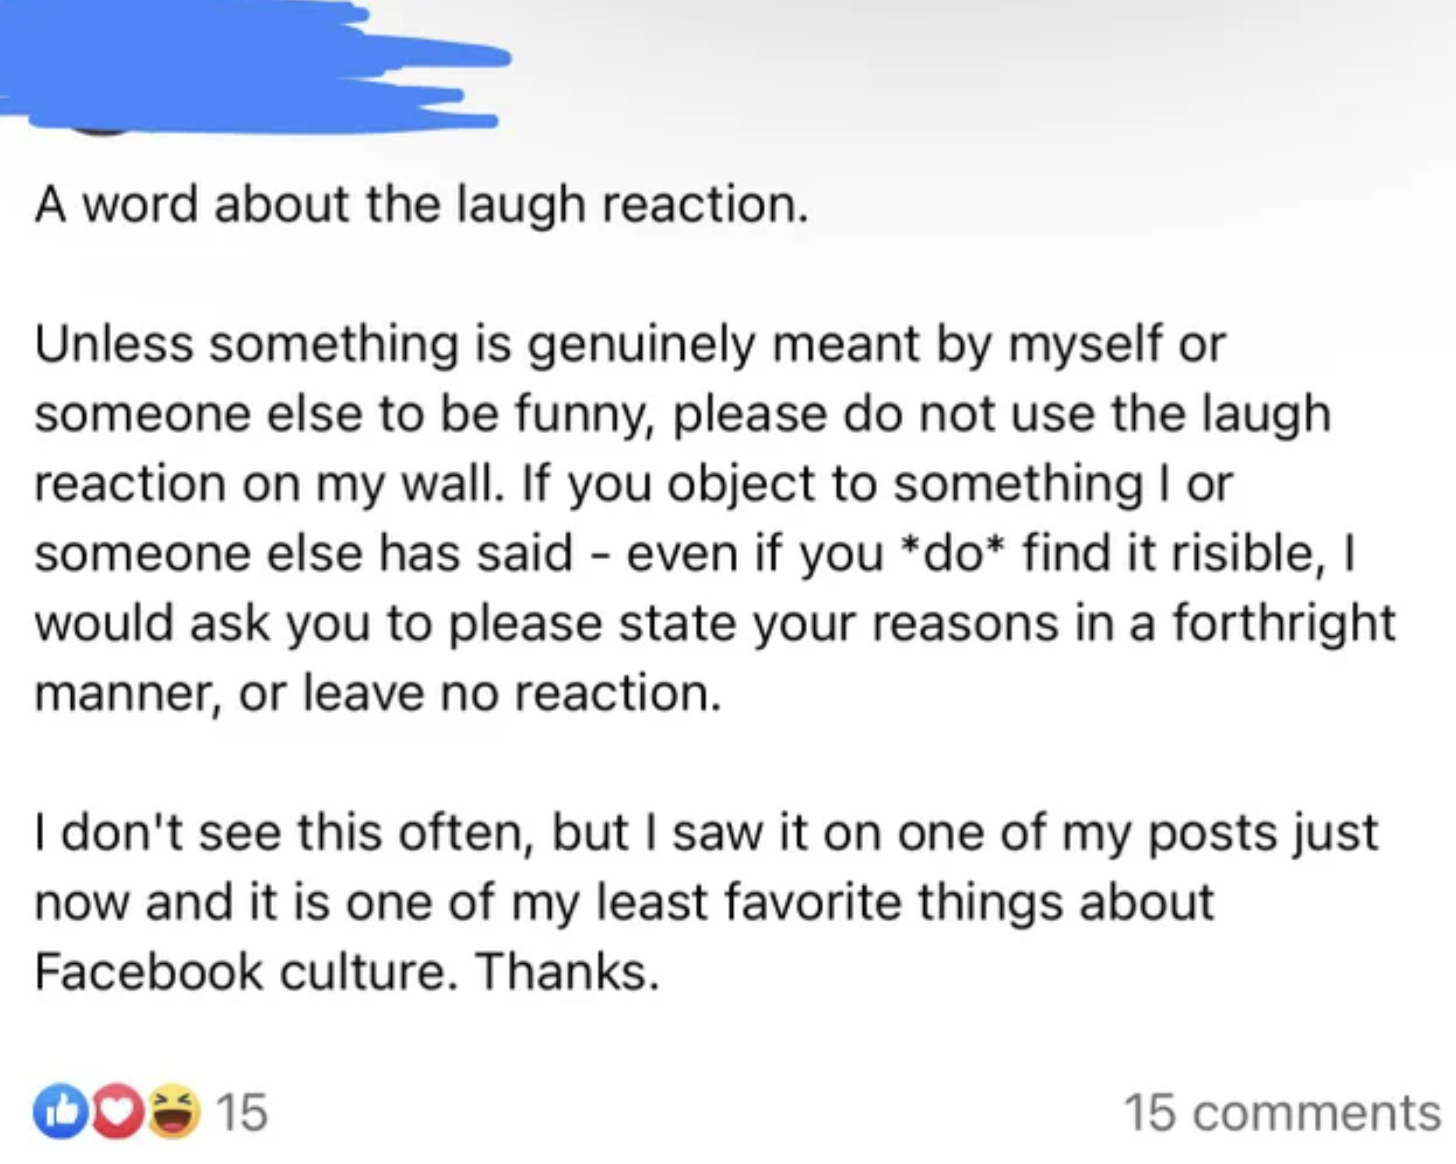 Crazy People of Facebook - A word about the laugh reaction. Unless something is genuinely meant by myself or someone else to be funny, please do not use the laugh reaction on my wall. If you object to something I or someone else has said even if you do fi